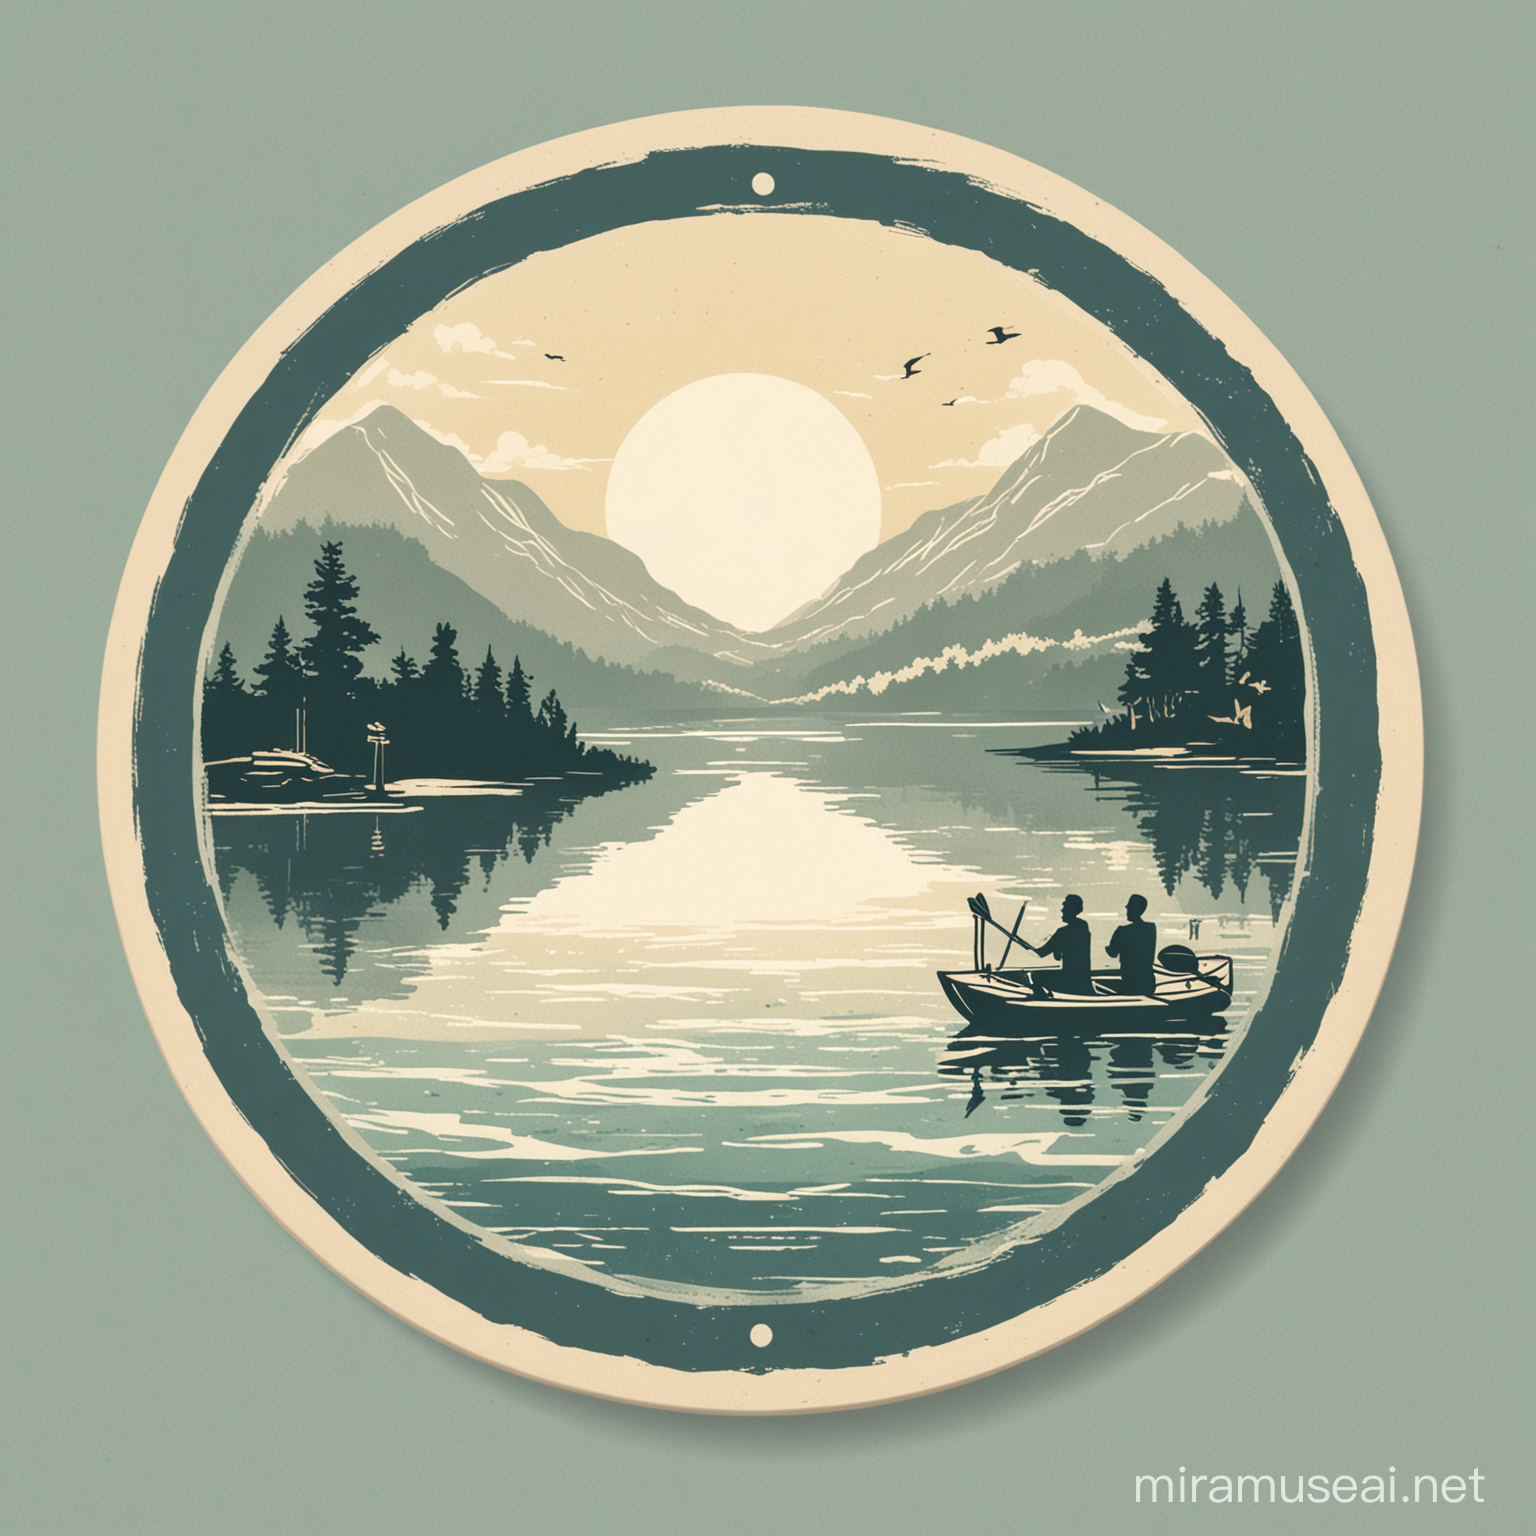 create a circle illustrated icon with "Lake Life", "est. 1976"